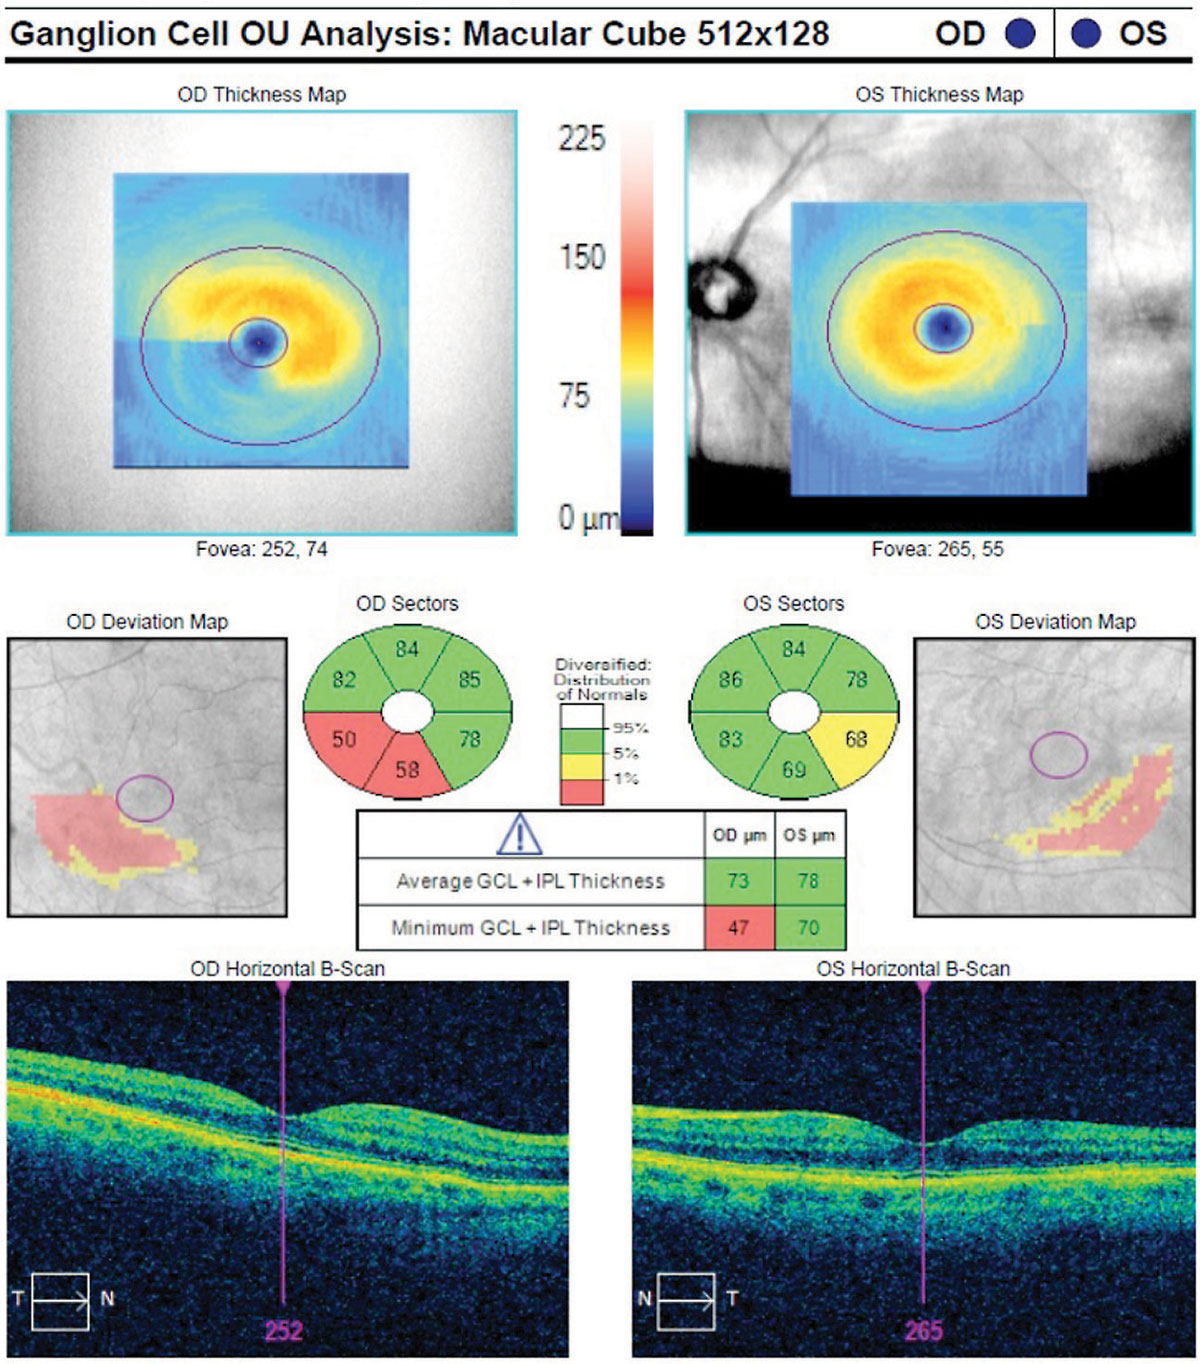 Diagnosis of glaucoma in highly myopic eyes can be difficult, with certain OCT parameters trumping others. Macular ganglion cell-inner plexiform layer proved decisive in this study.